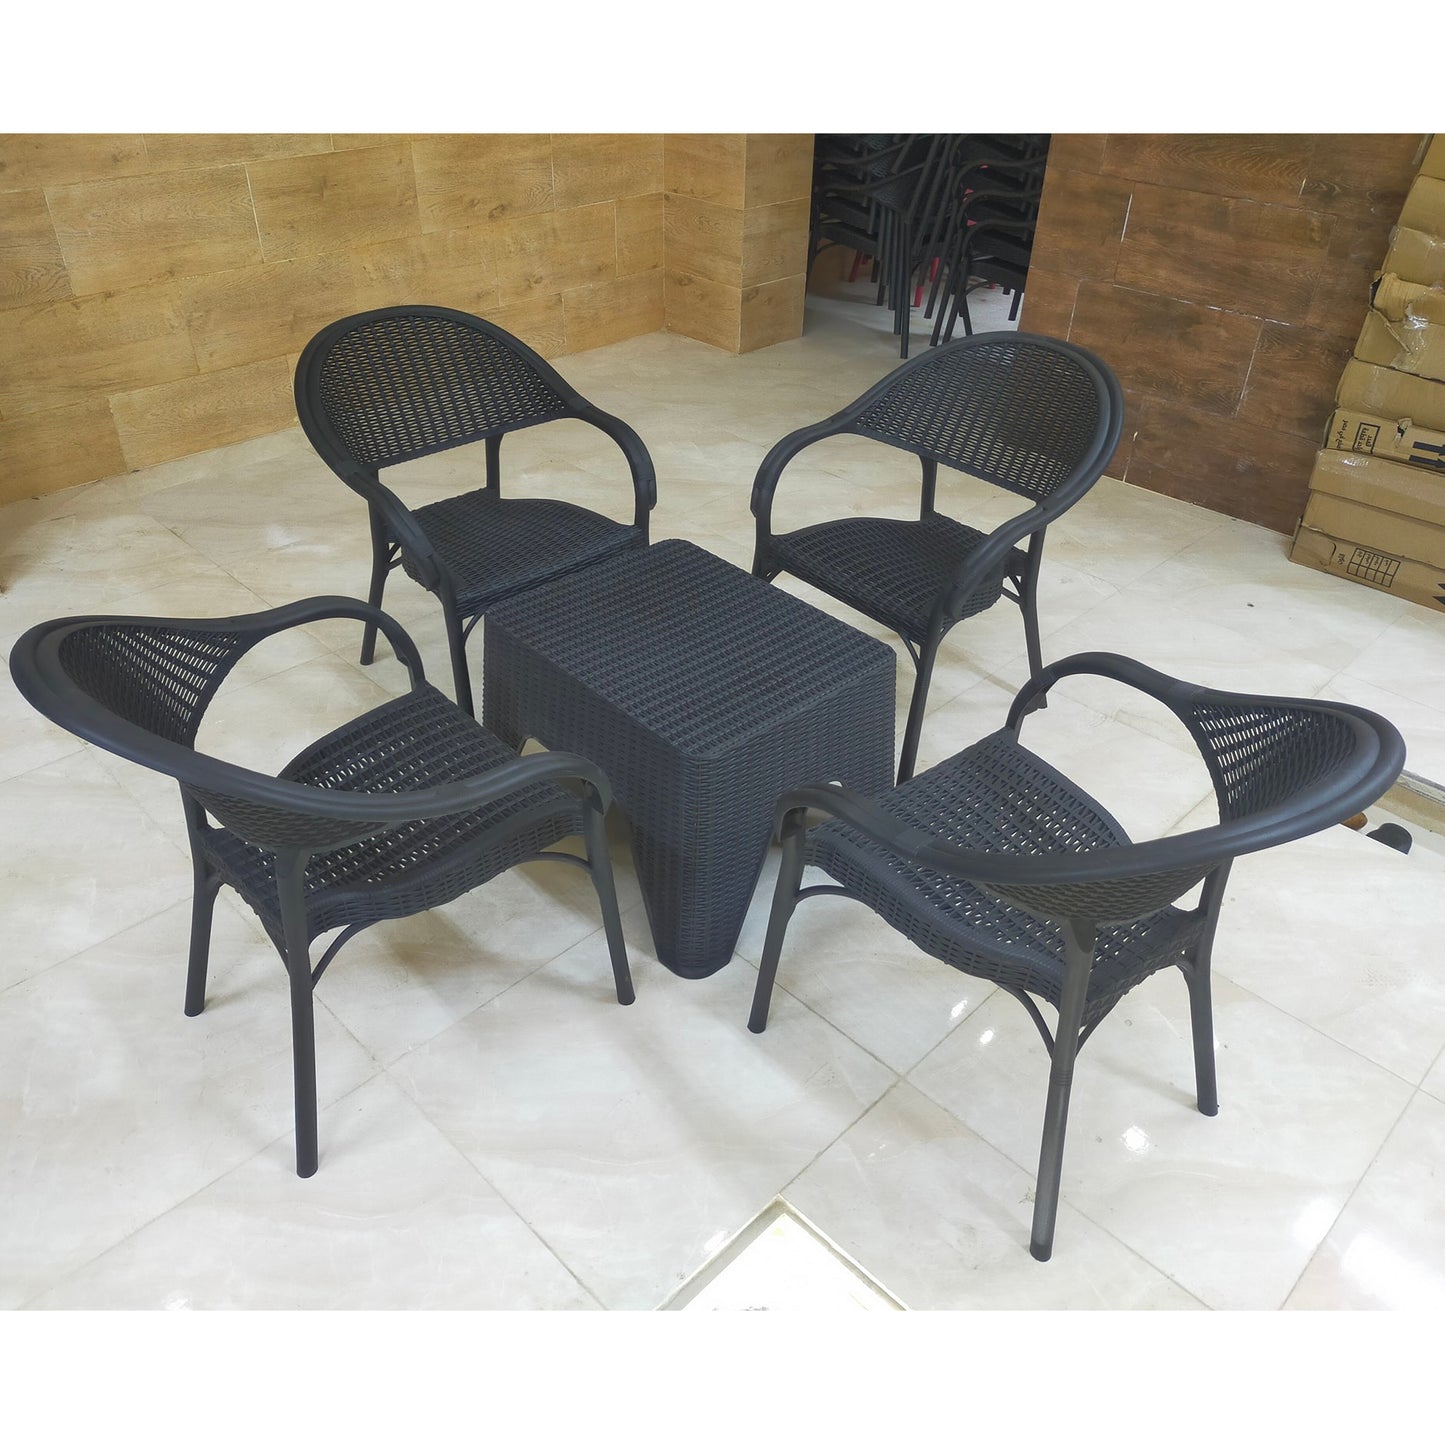 Outdoor furniture set - 5 pieces - FRS55